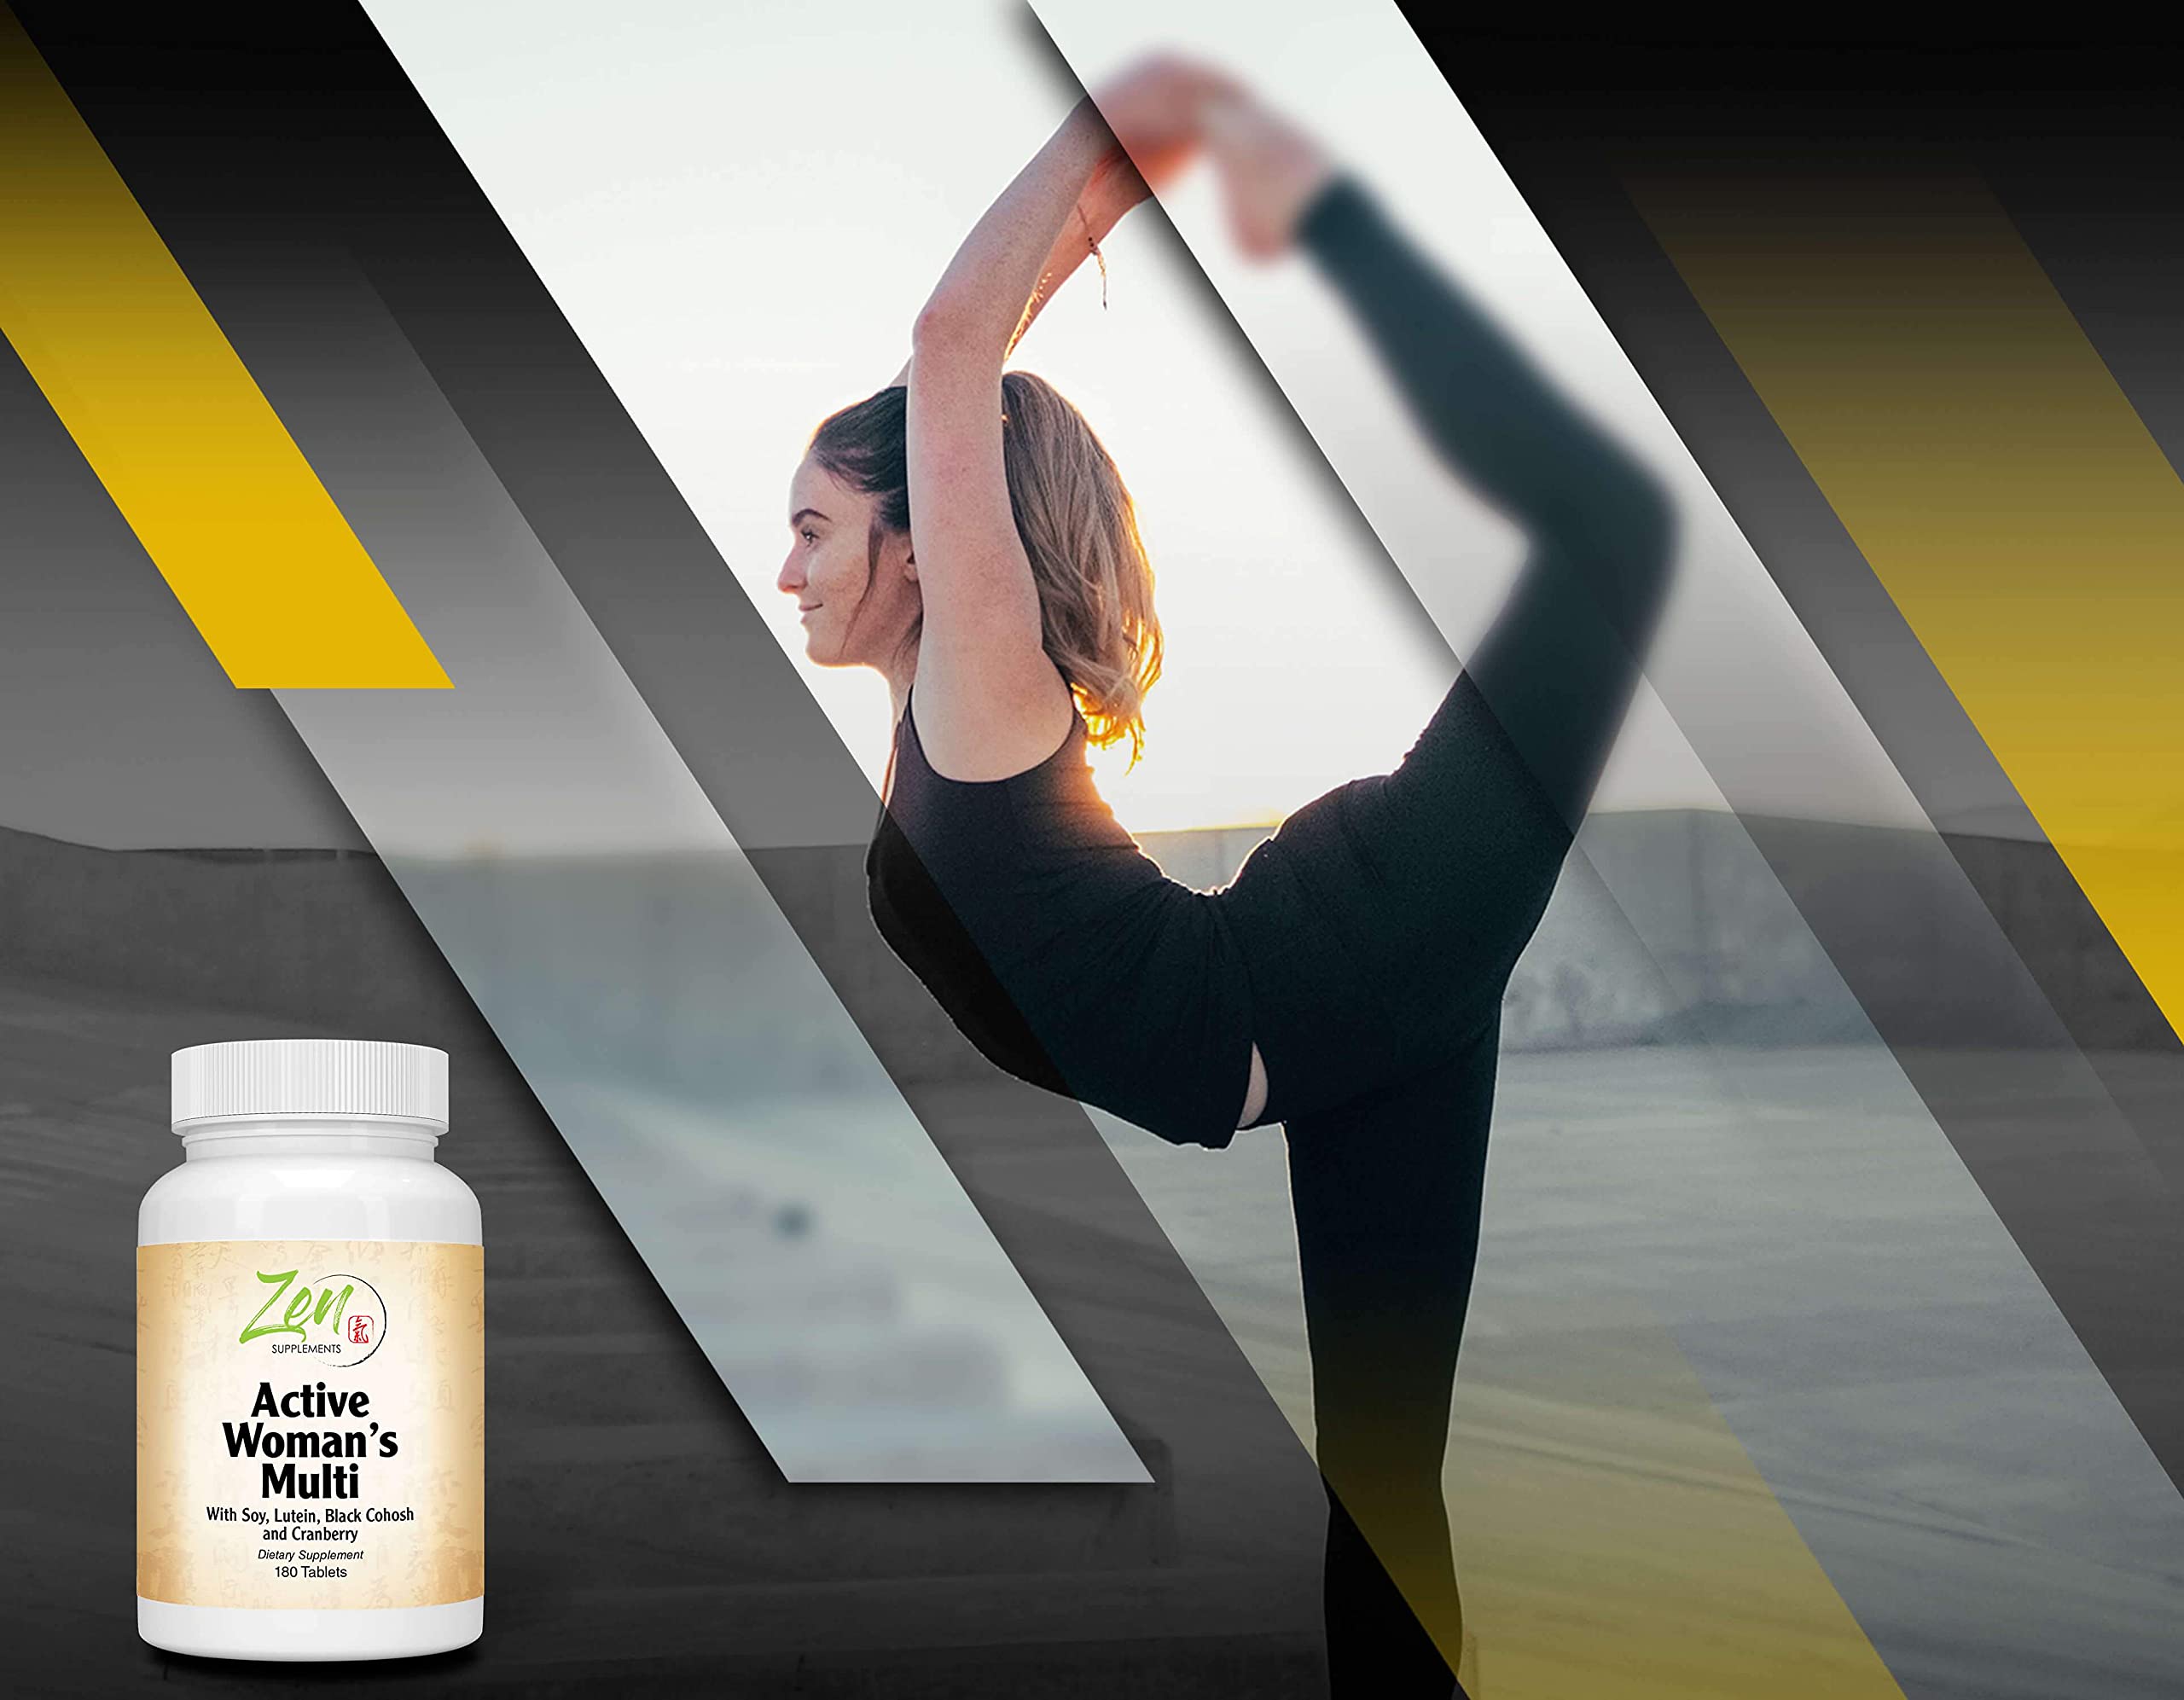 Zen Supplements - Active Woman’s Multi-Vitamin 180-Tabs - Women's Multivitamin & Multimineral with Botanicals & Herbs - Supports Immune Health & Sexual Wellness